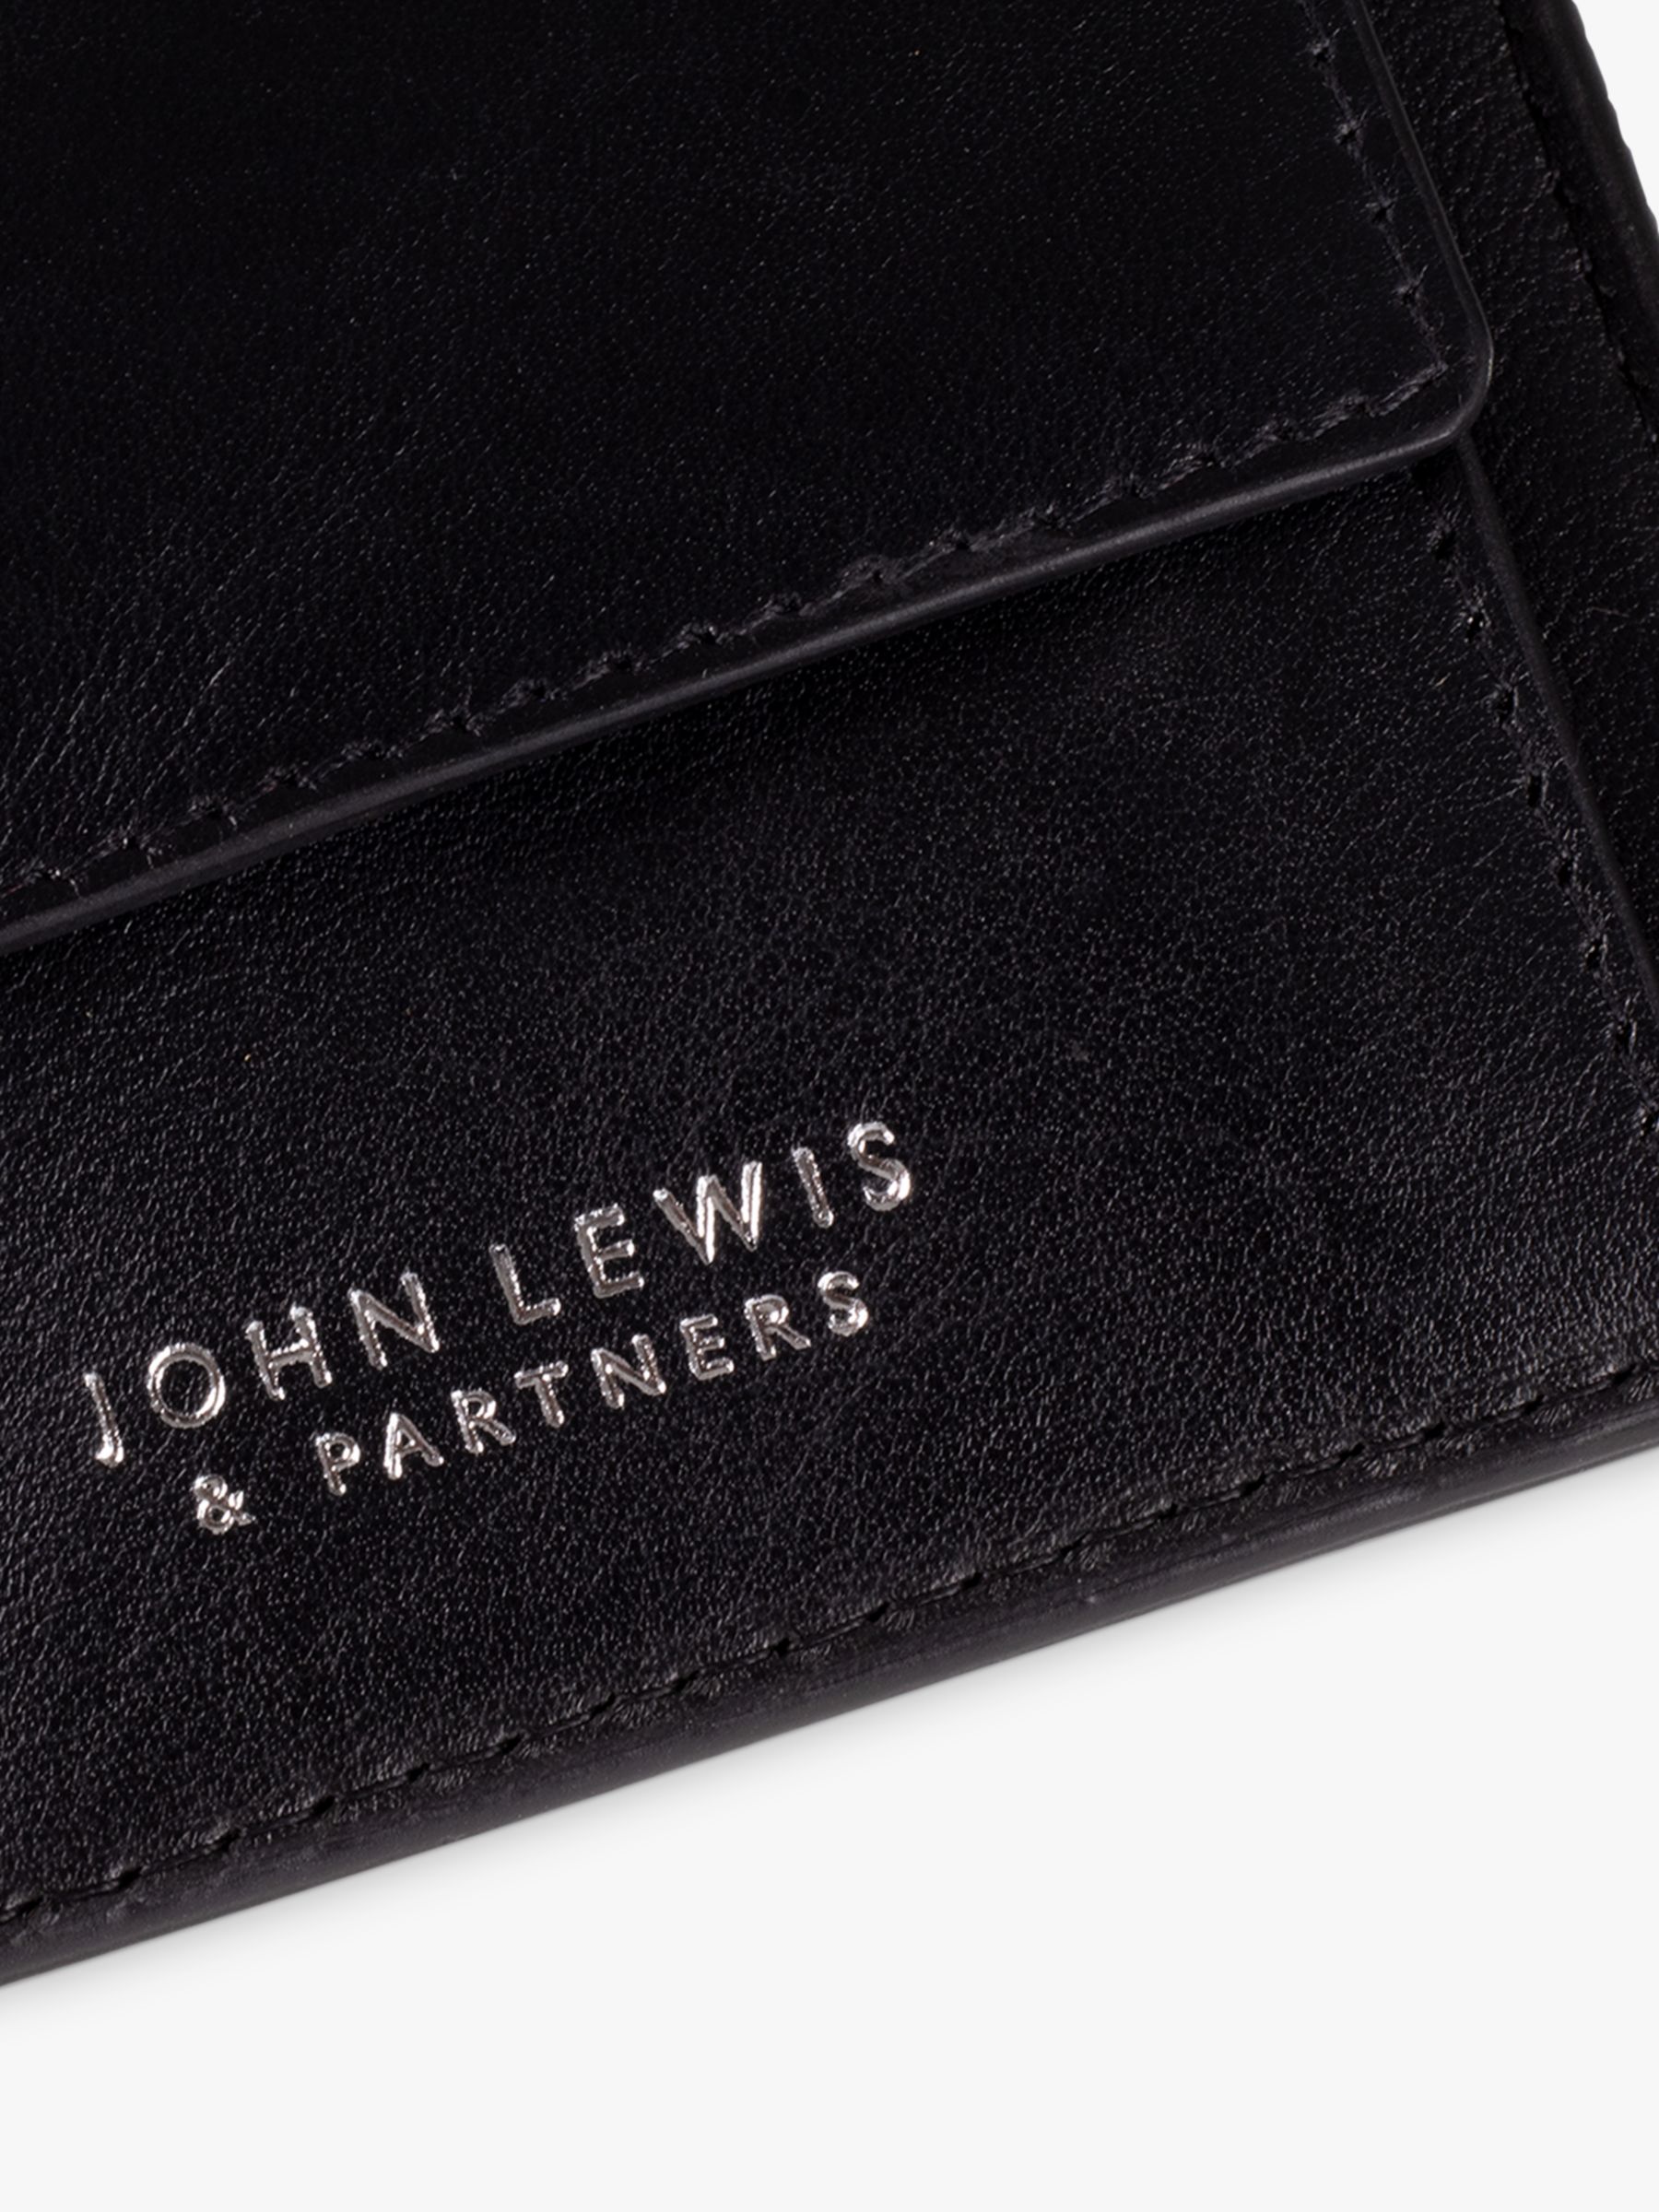 John Lewis Vegetable Tanned Leather Card Coin Bifold Wallet, Black at ...